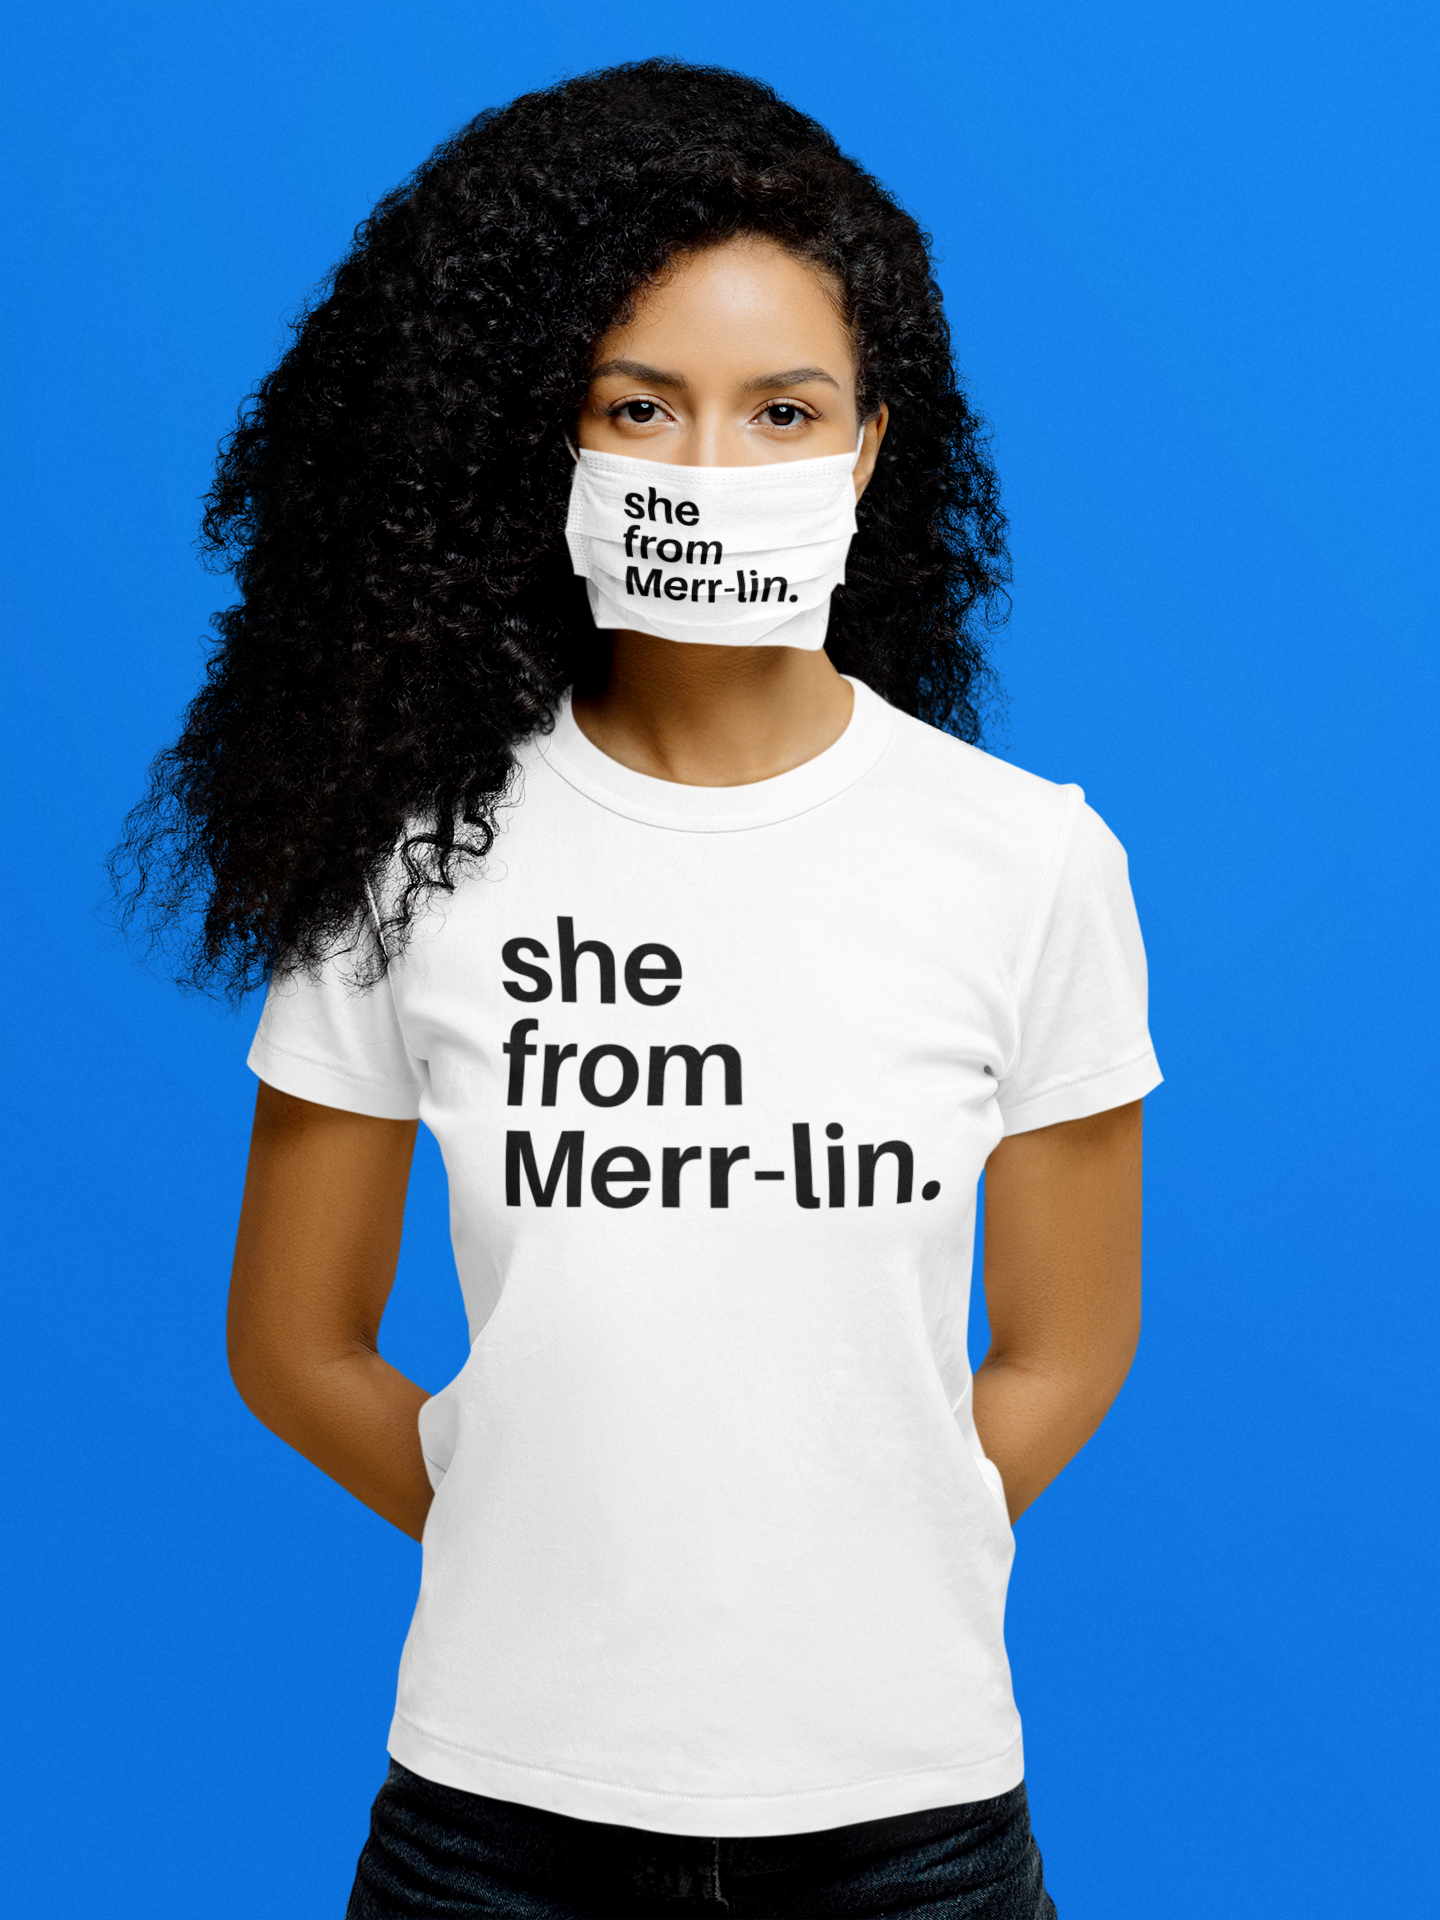 She From Merr-lin. T-shirt and Mask Set